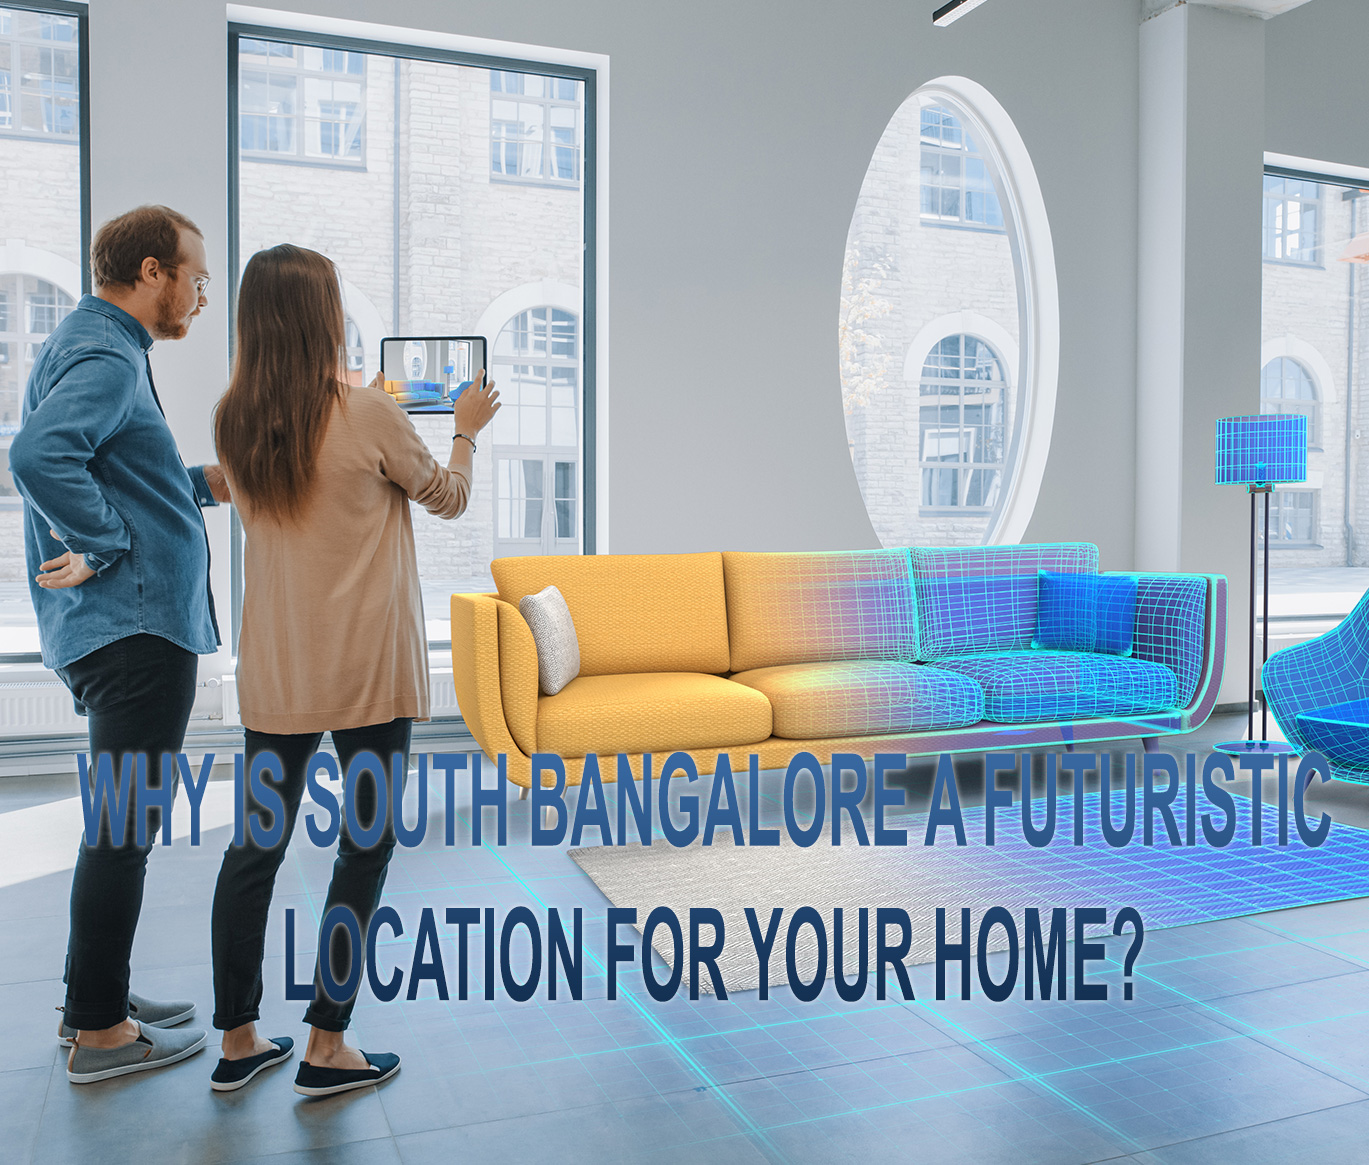 Why is South Bangalore a futuristic location for your home?